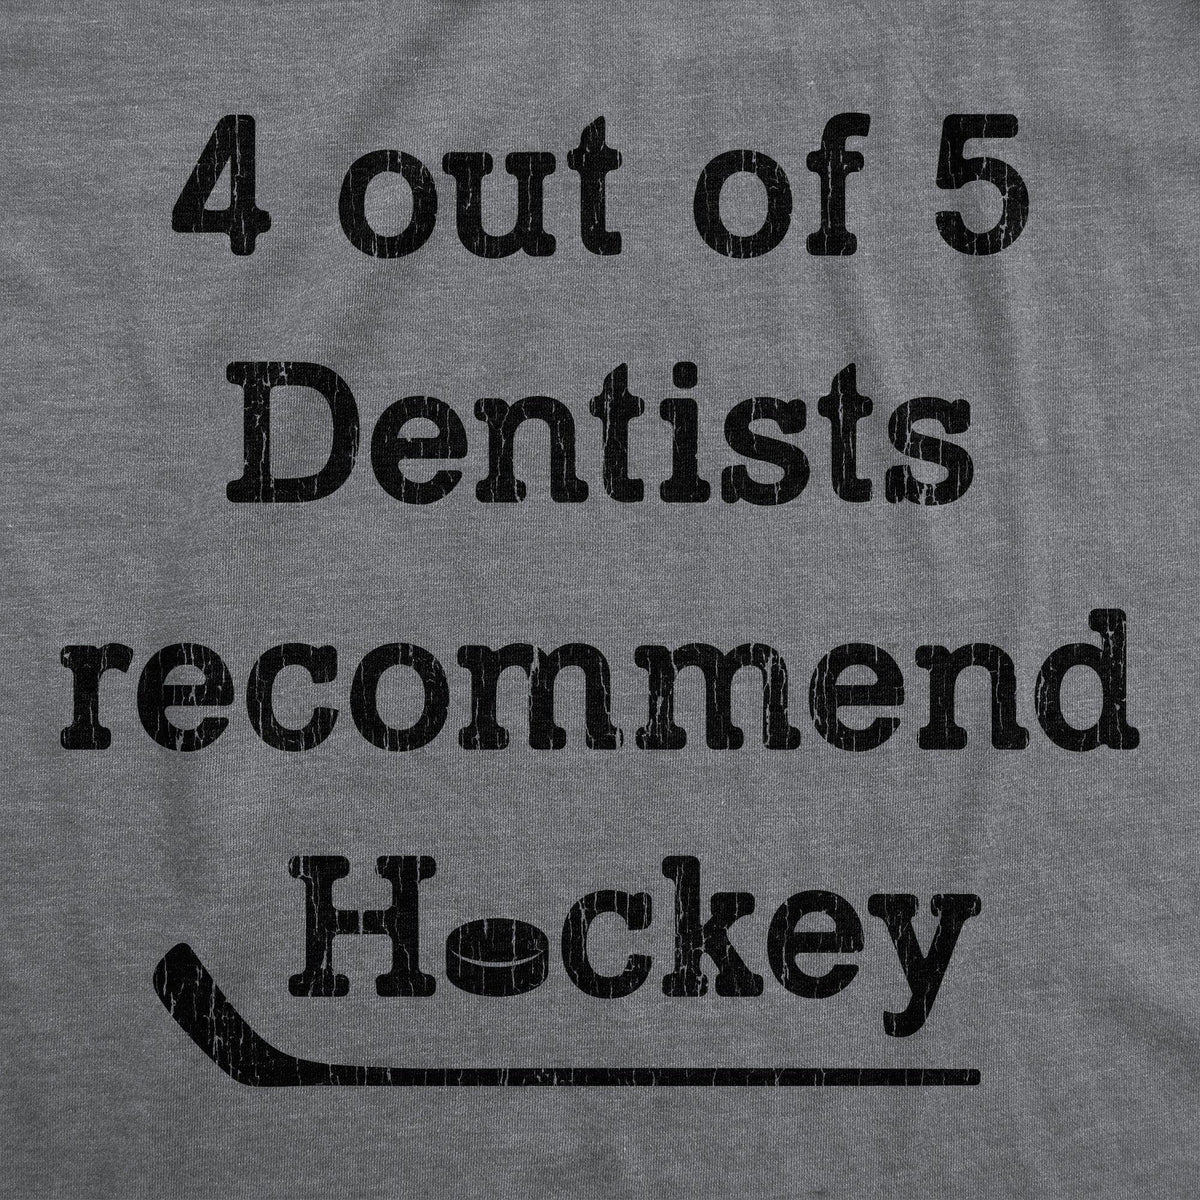 4 Out Of 5 Dentists Recommend Hockey Men&#39;s Tshirt - Crazy Dog T-Shirts